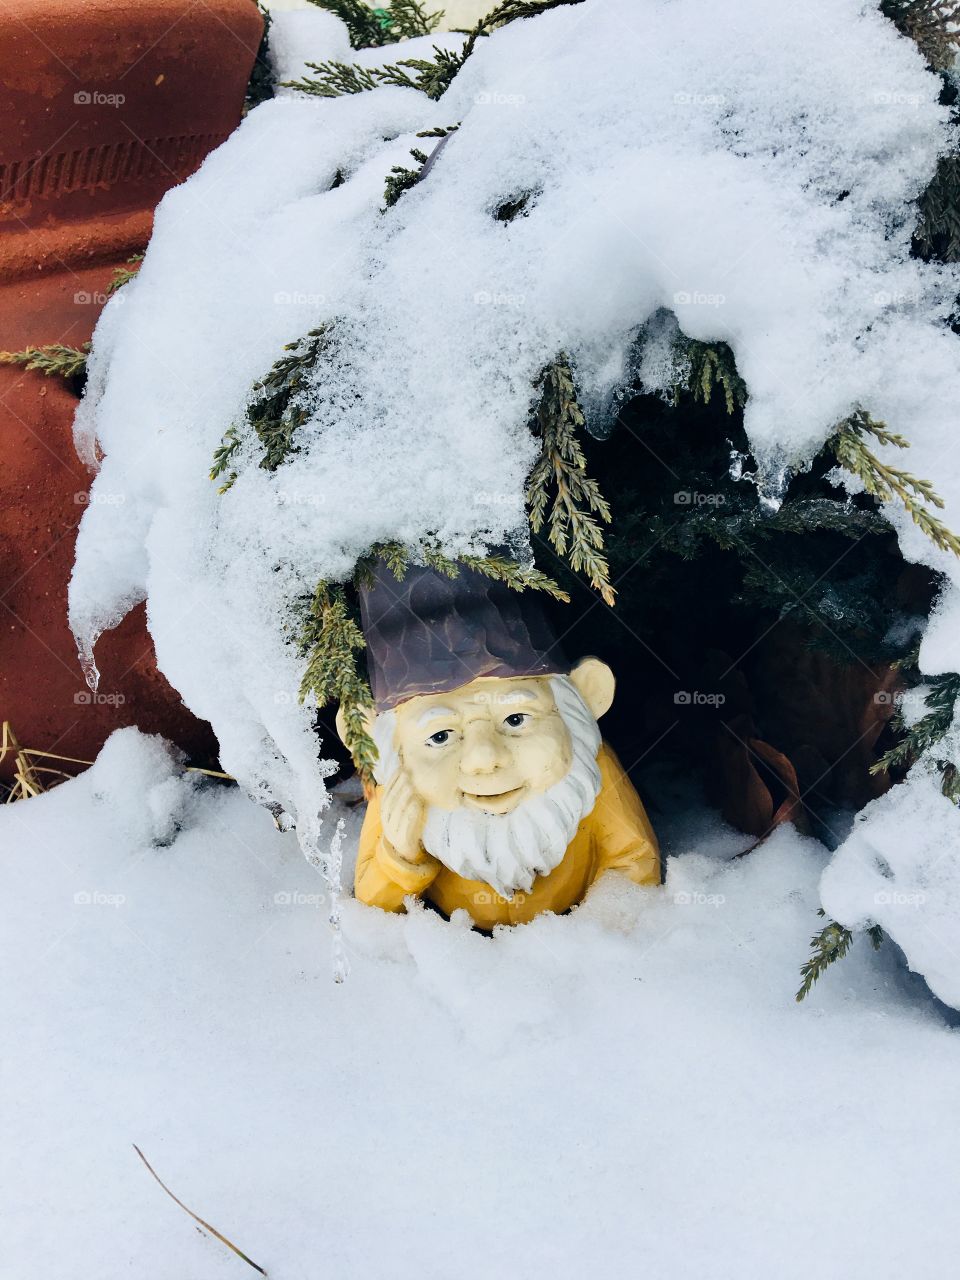 Spring snow covering the gnome in the garden